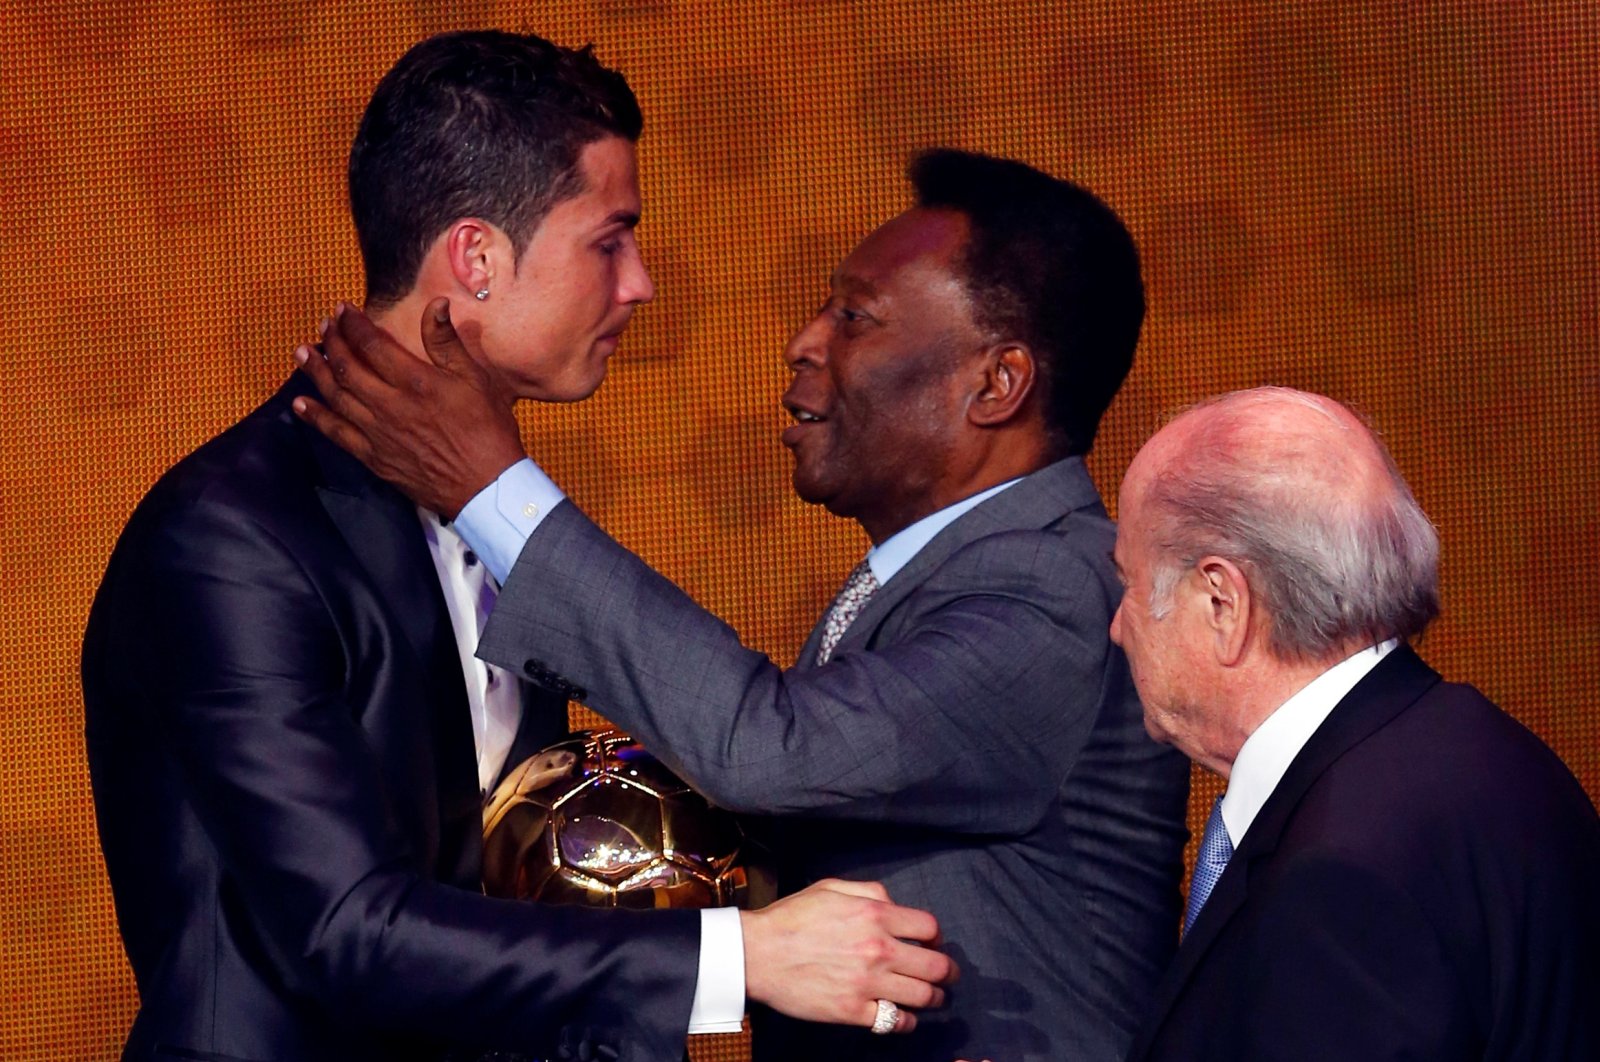 Portugal's Cristiano Ronaldo (L) is congratulated by Pele (C) after being awarded the FIFA Ballon d'Or 2013 in Zurich, Jan. 13, 2014. (Reuters Photo)